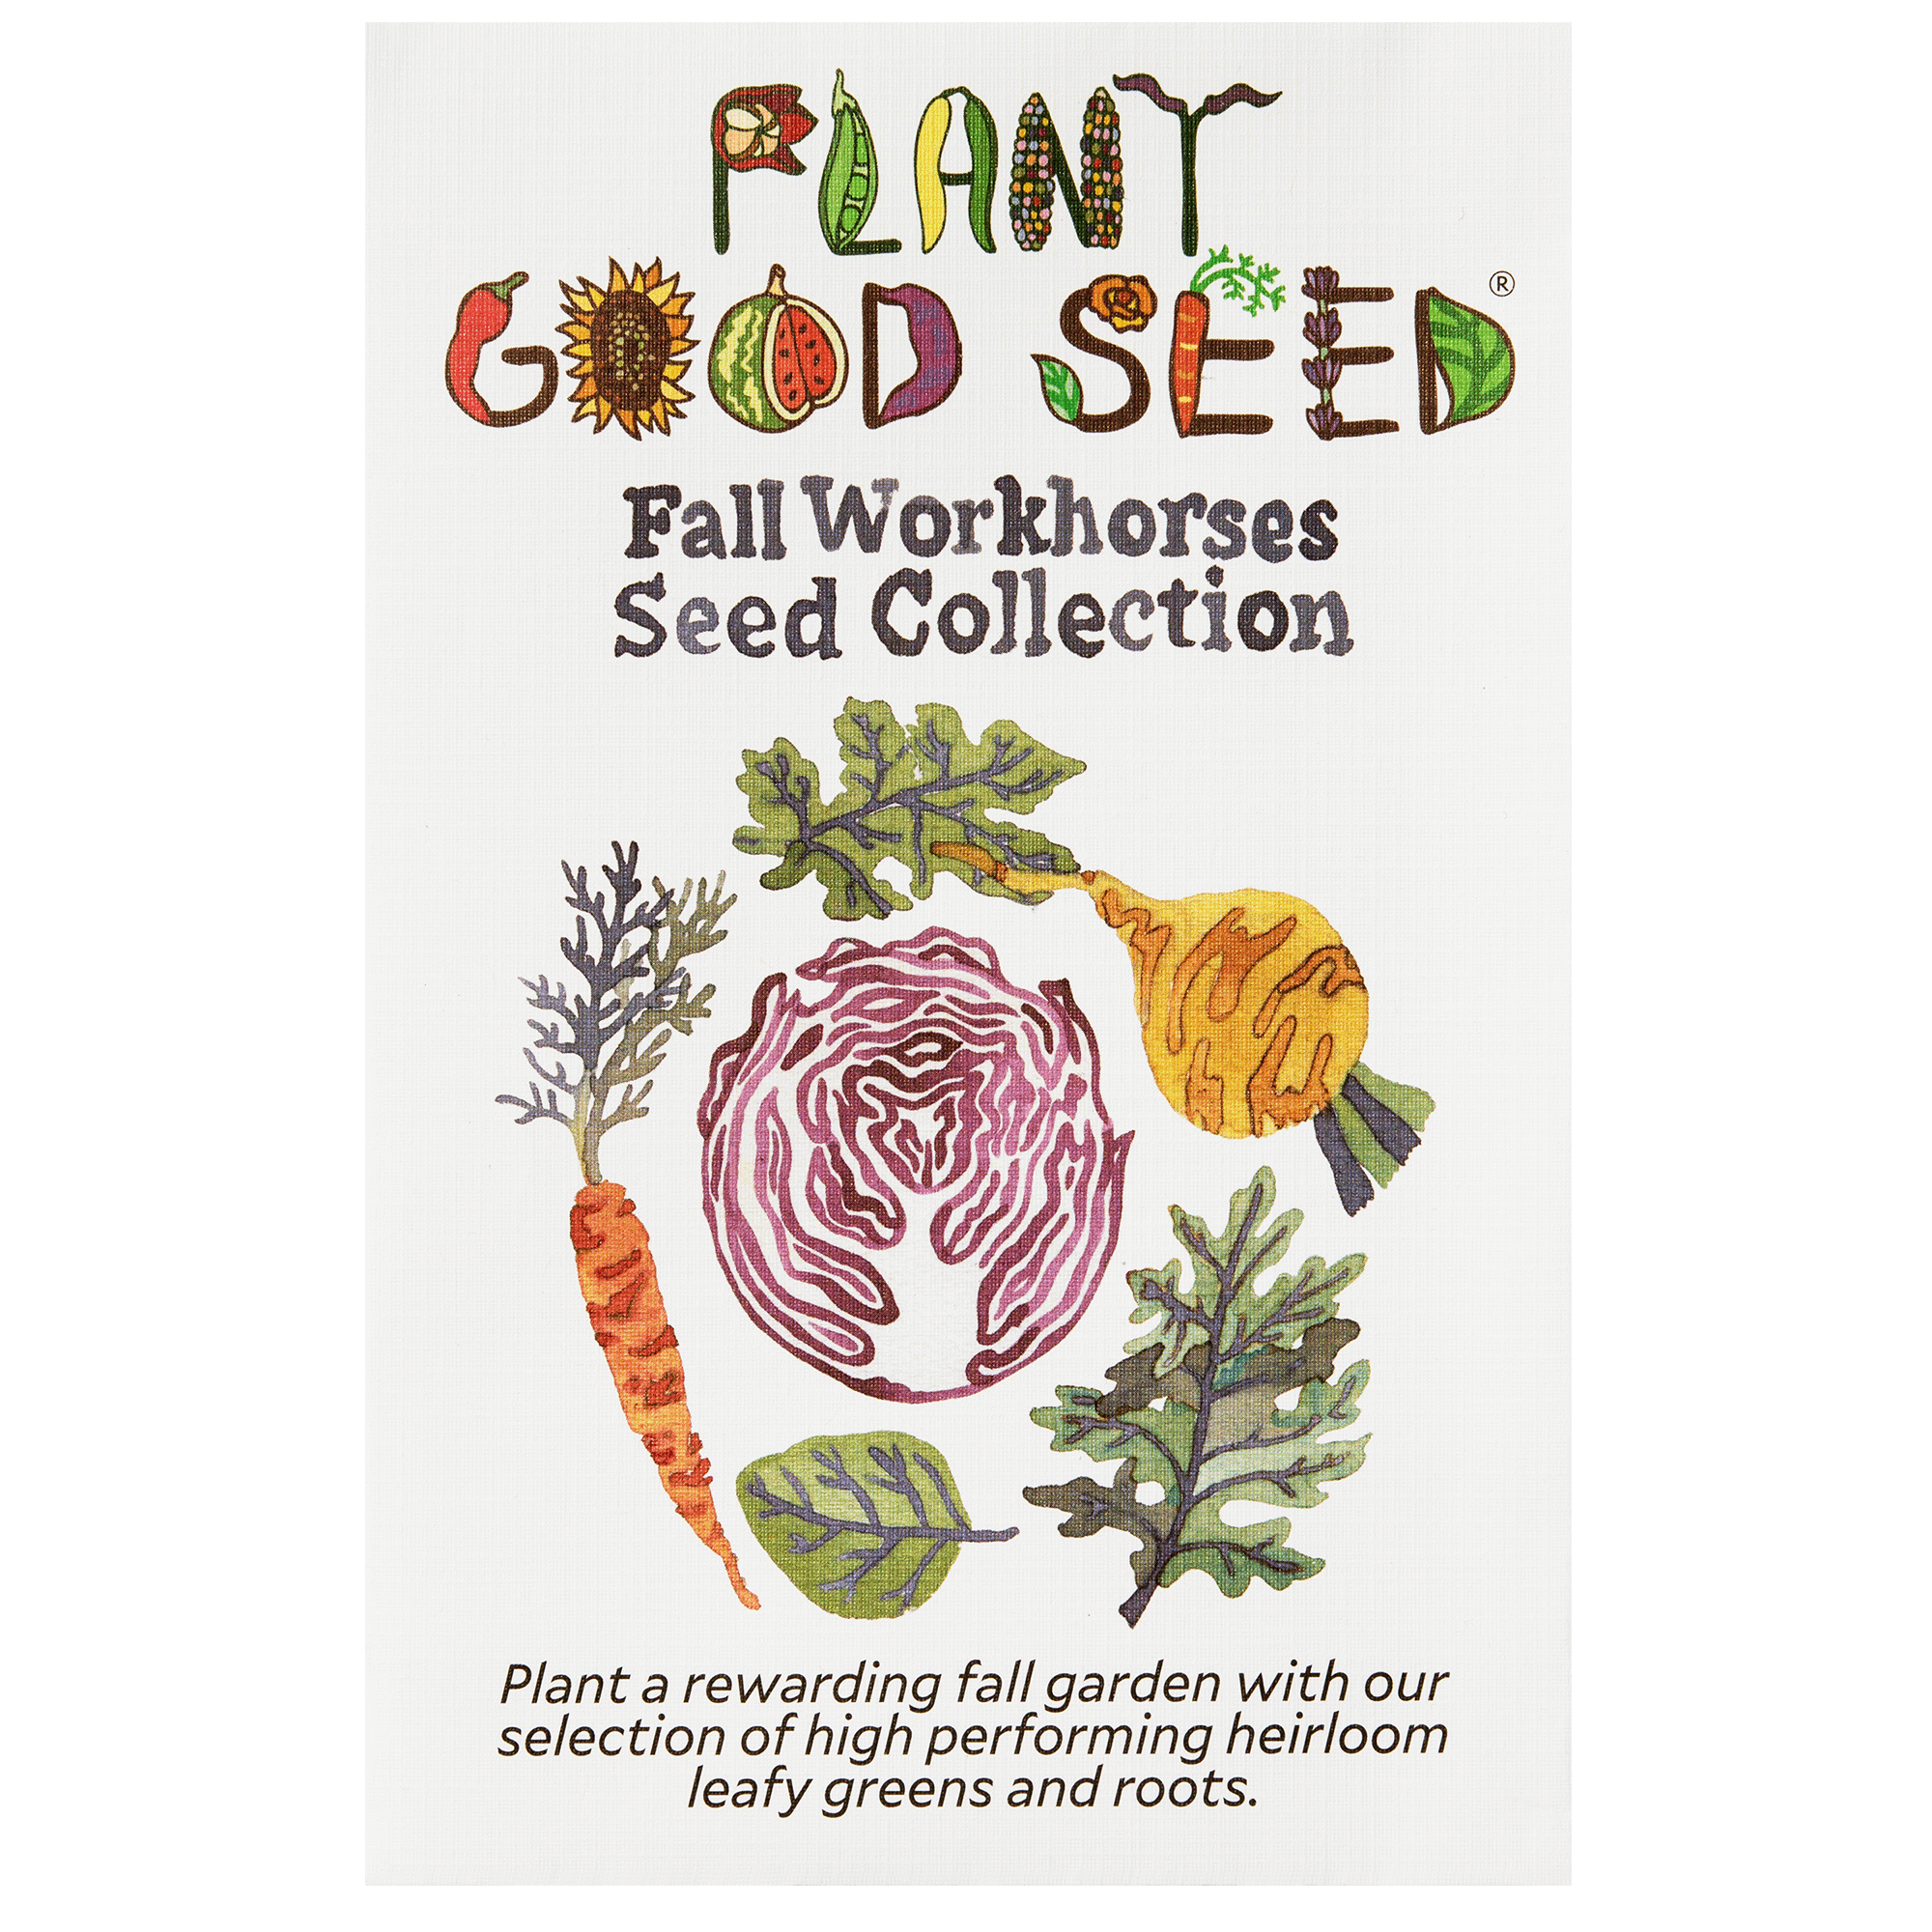 Fall Workhorses Seed Collection